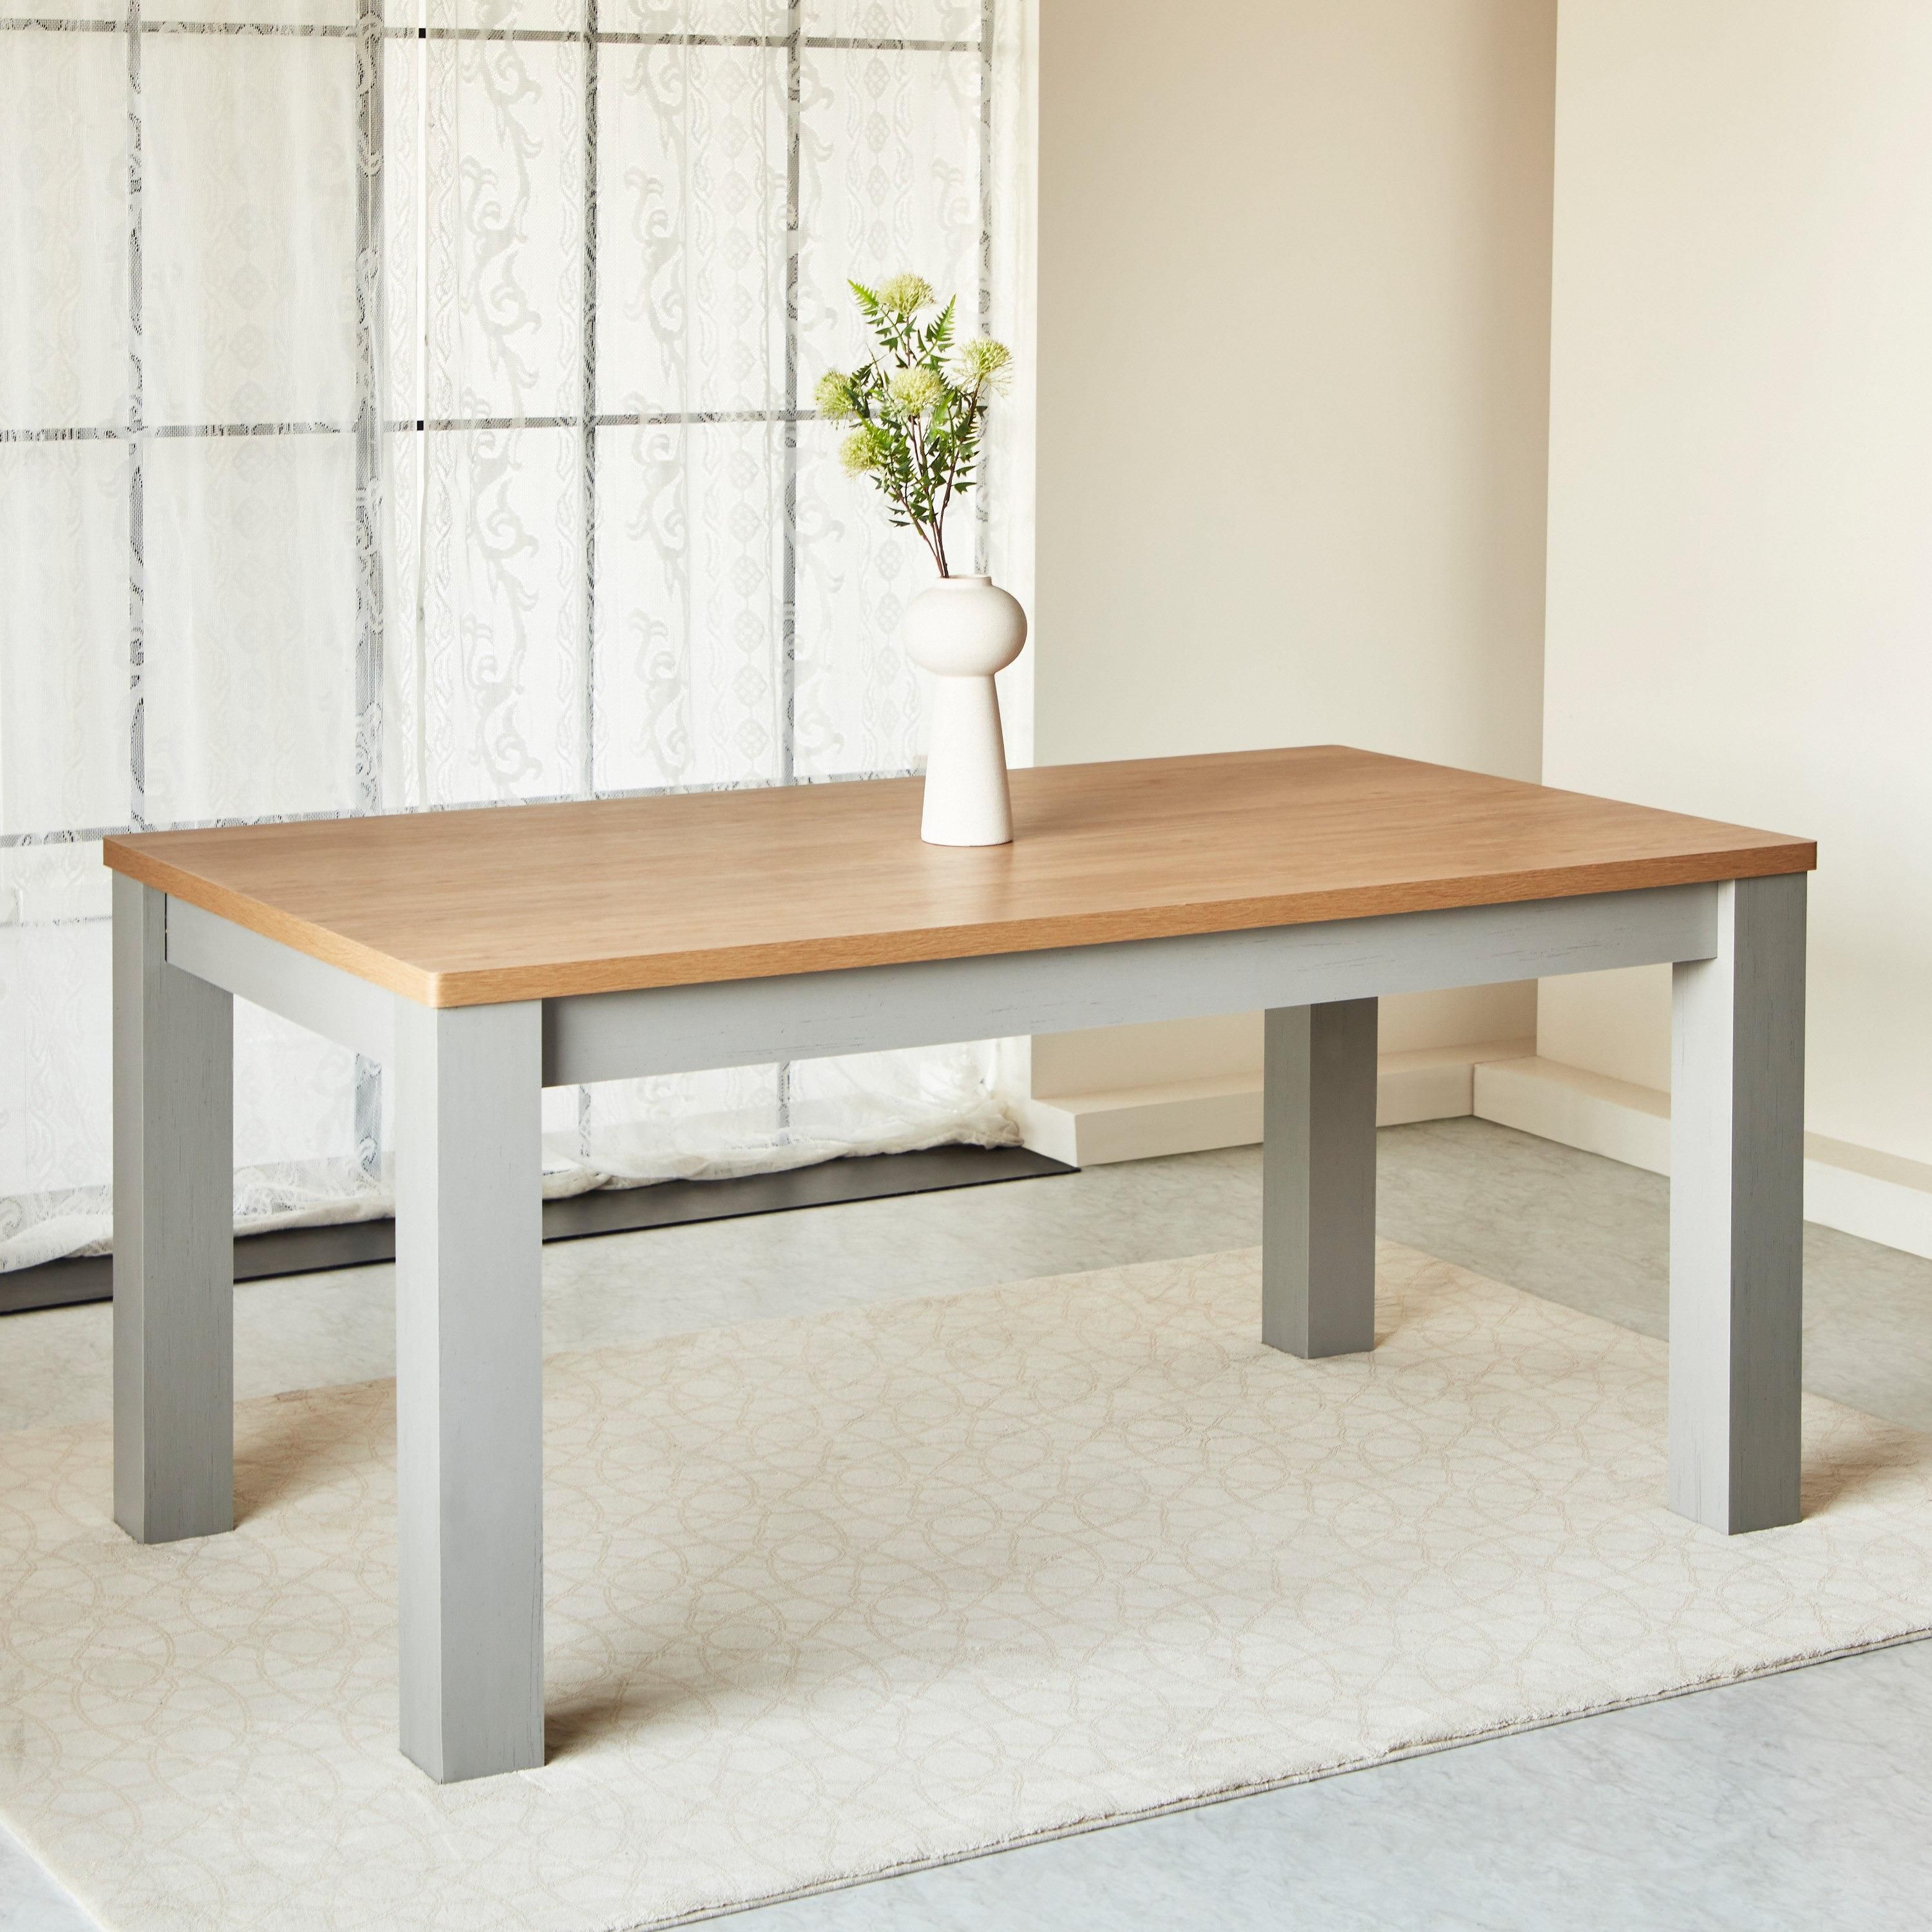 Vinci 6-Seater Dining Table